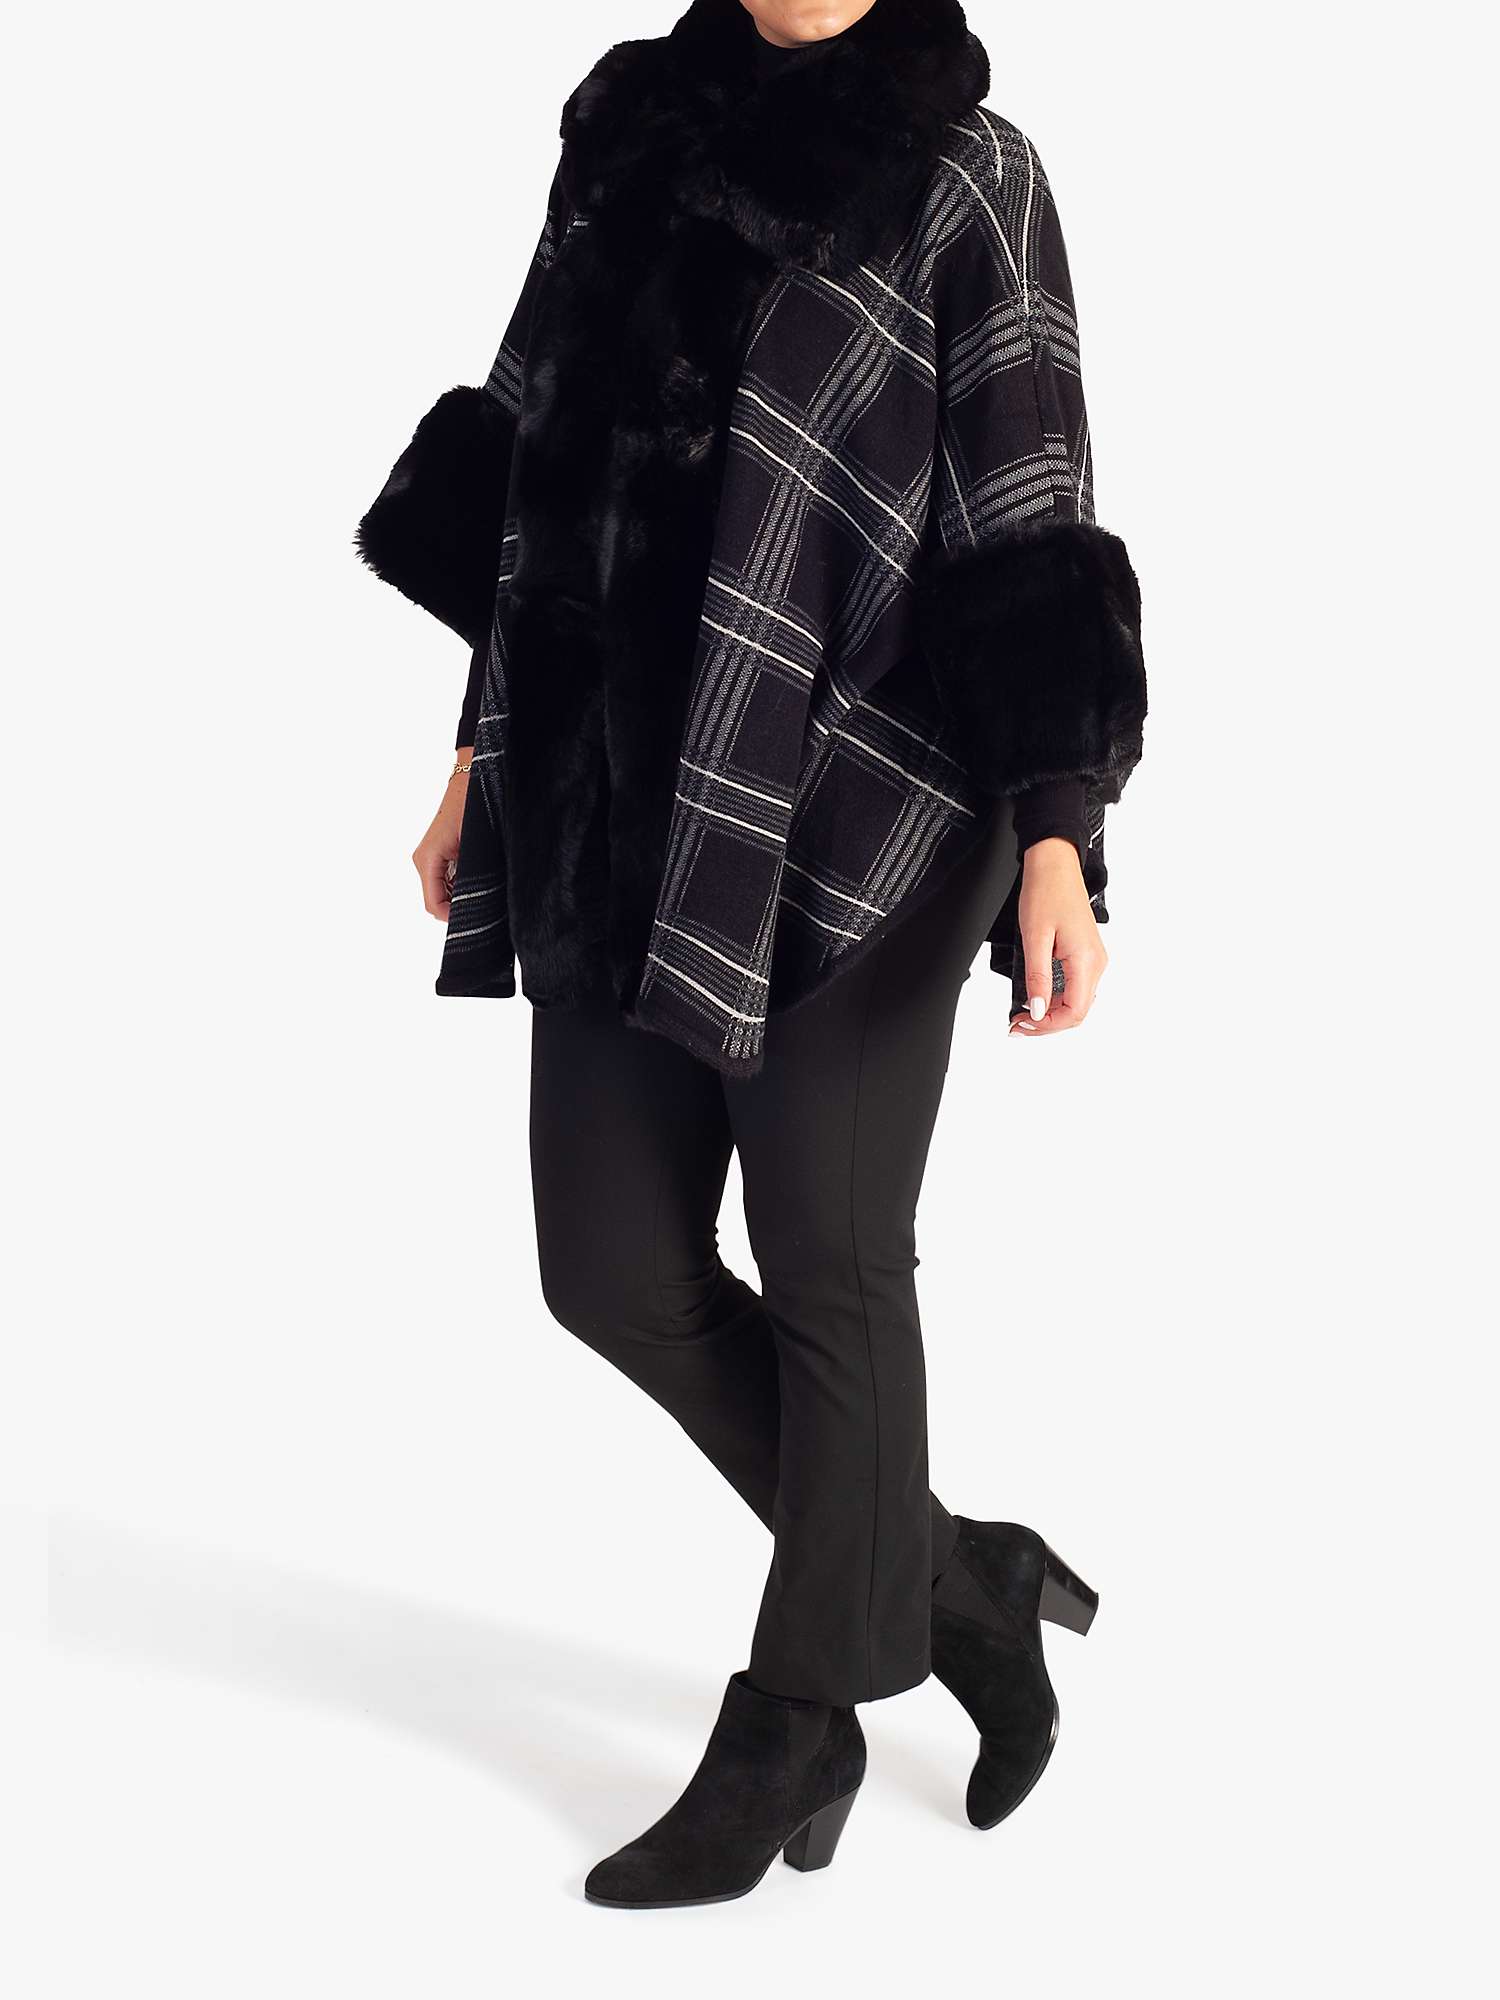 Buy chesca Check Wrap with Fur Trim, Black Online at johnlewis.com